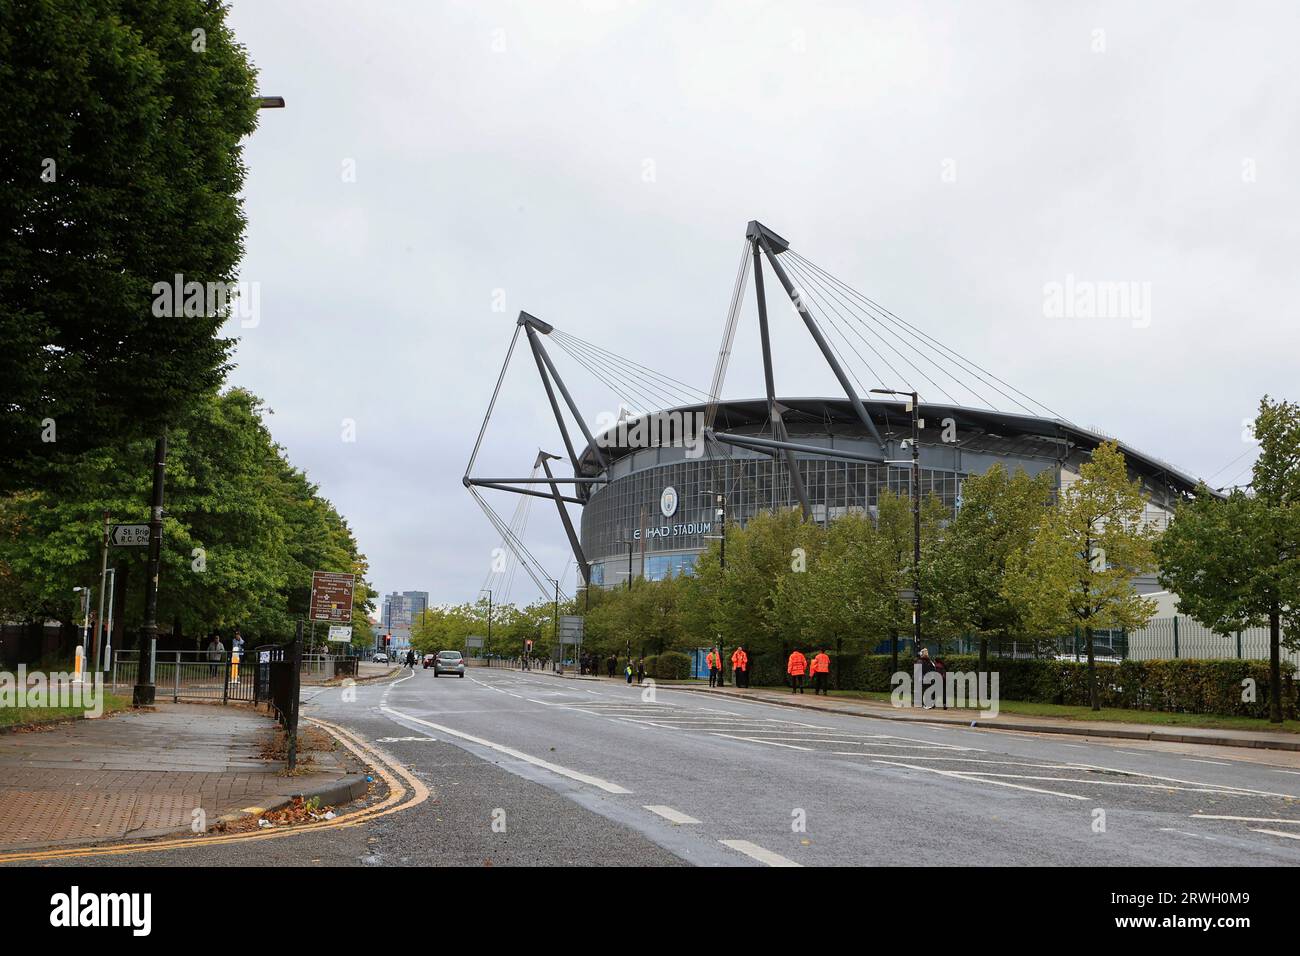 Exterior view of the Etihad Stadium ahead of the UEFA Champions League match Manchester City vs Red Star Belgrade at Etihad Stadium, Manchester, United Kingdom, 19th September 2023  (Photo by Conor Molloy/News Images) Stock Photo